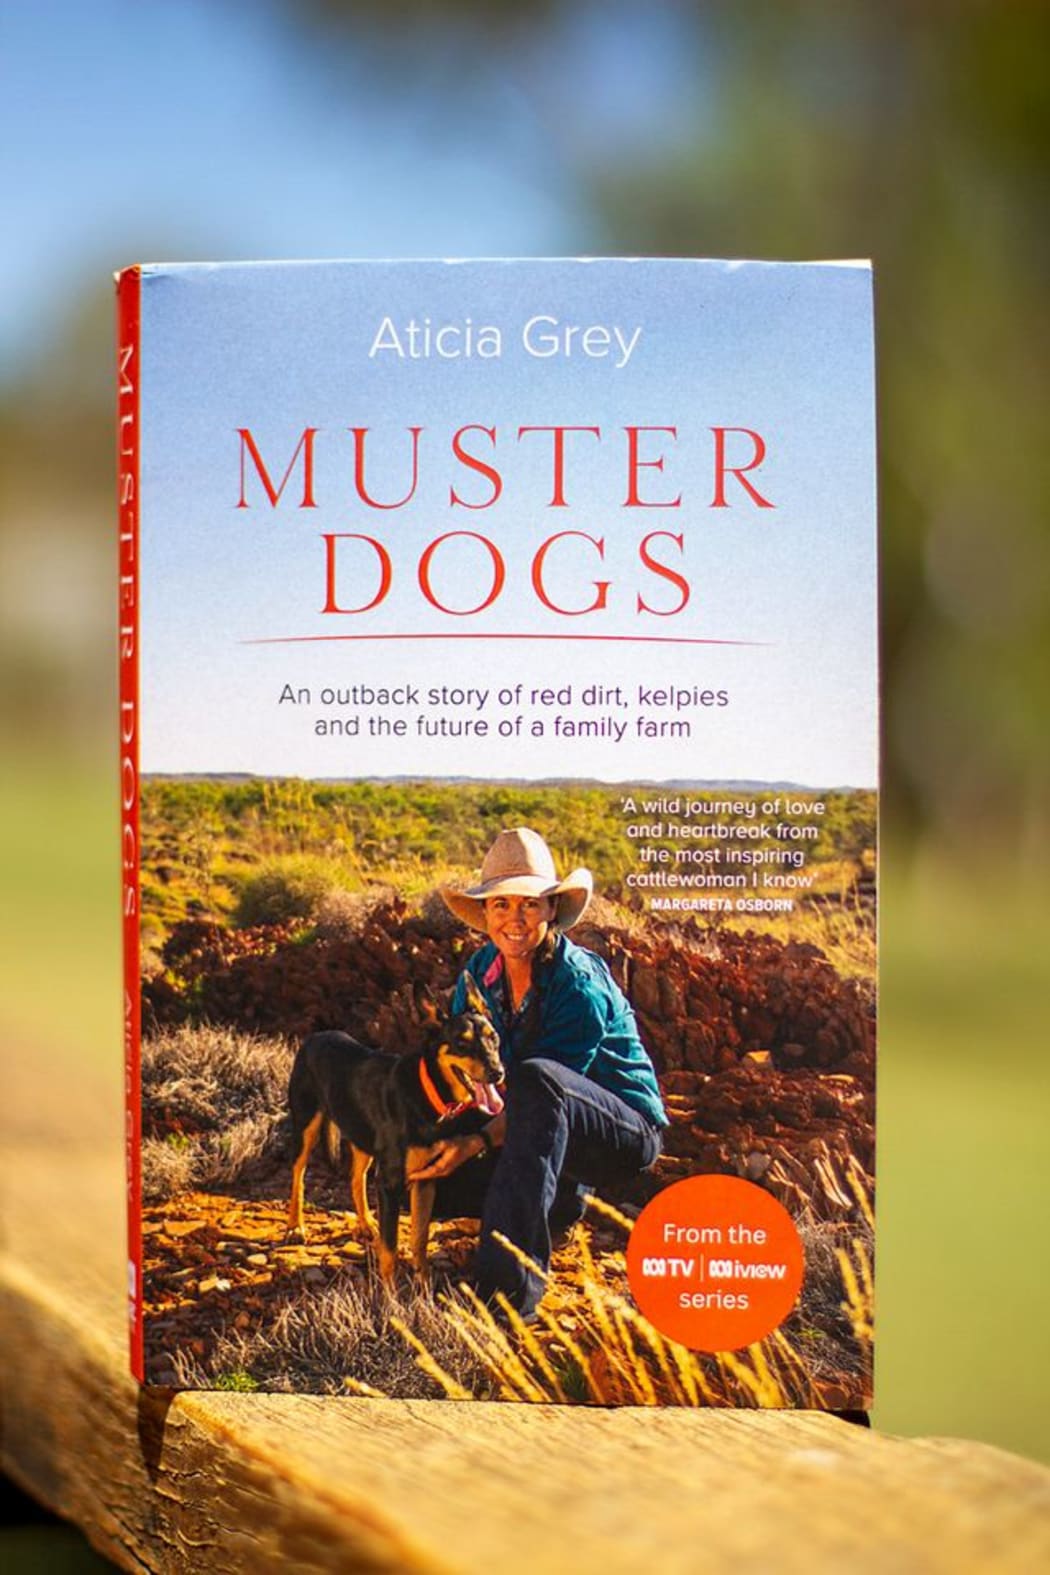 Muster Dogs by Aticia Grey